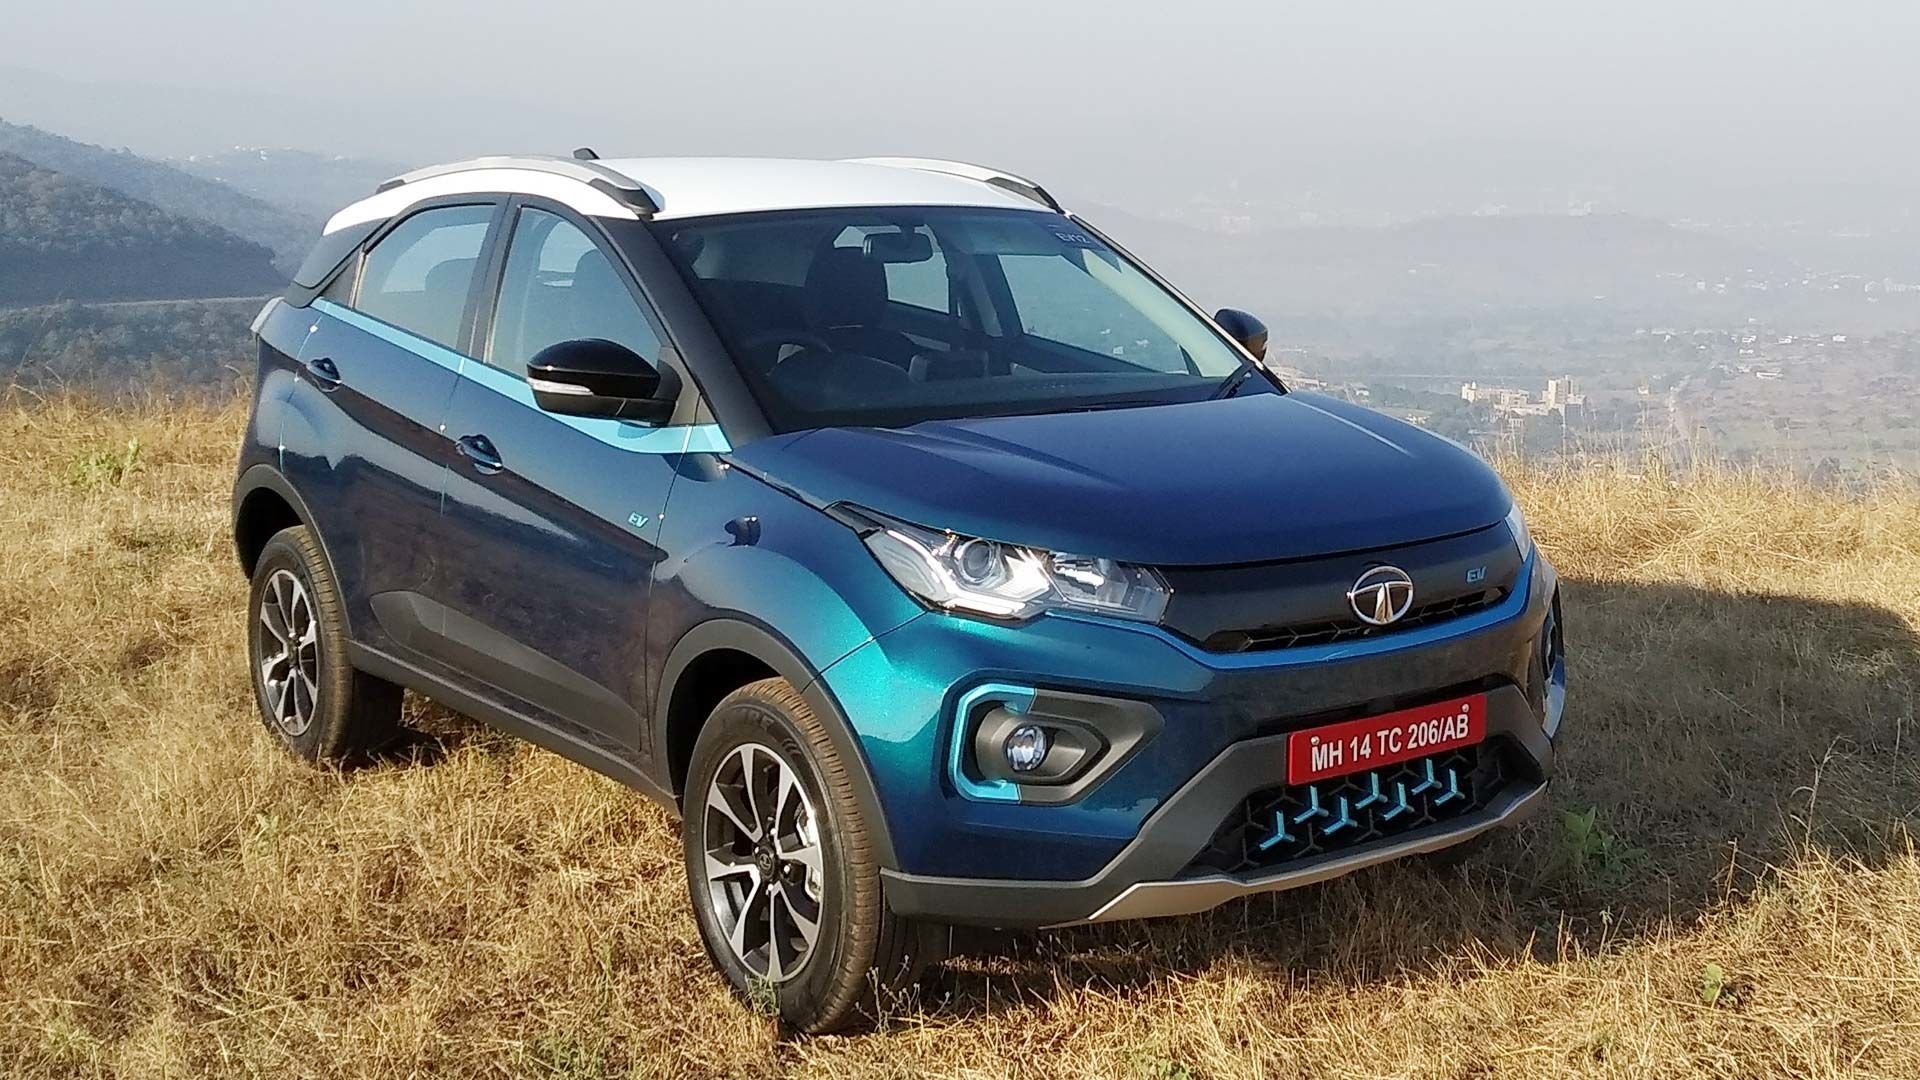 Tata Nexon EV Test Drive: The SUV Brings Affordable State Of The Art Electric Mobility To India